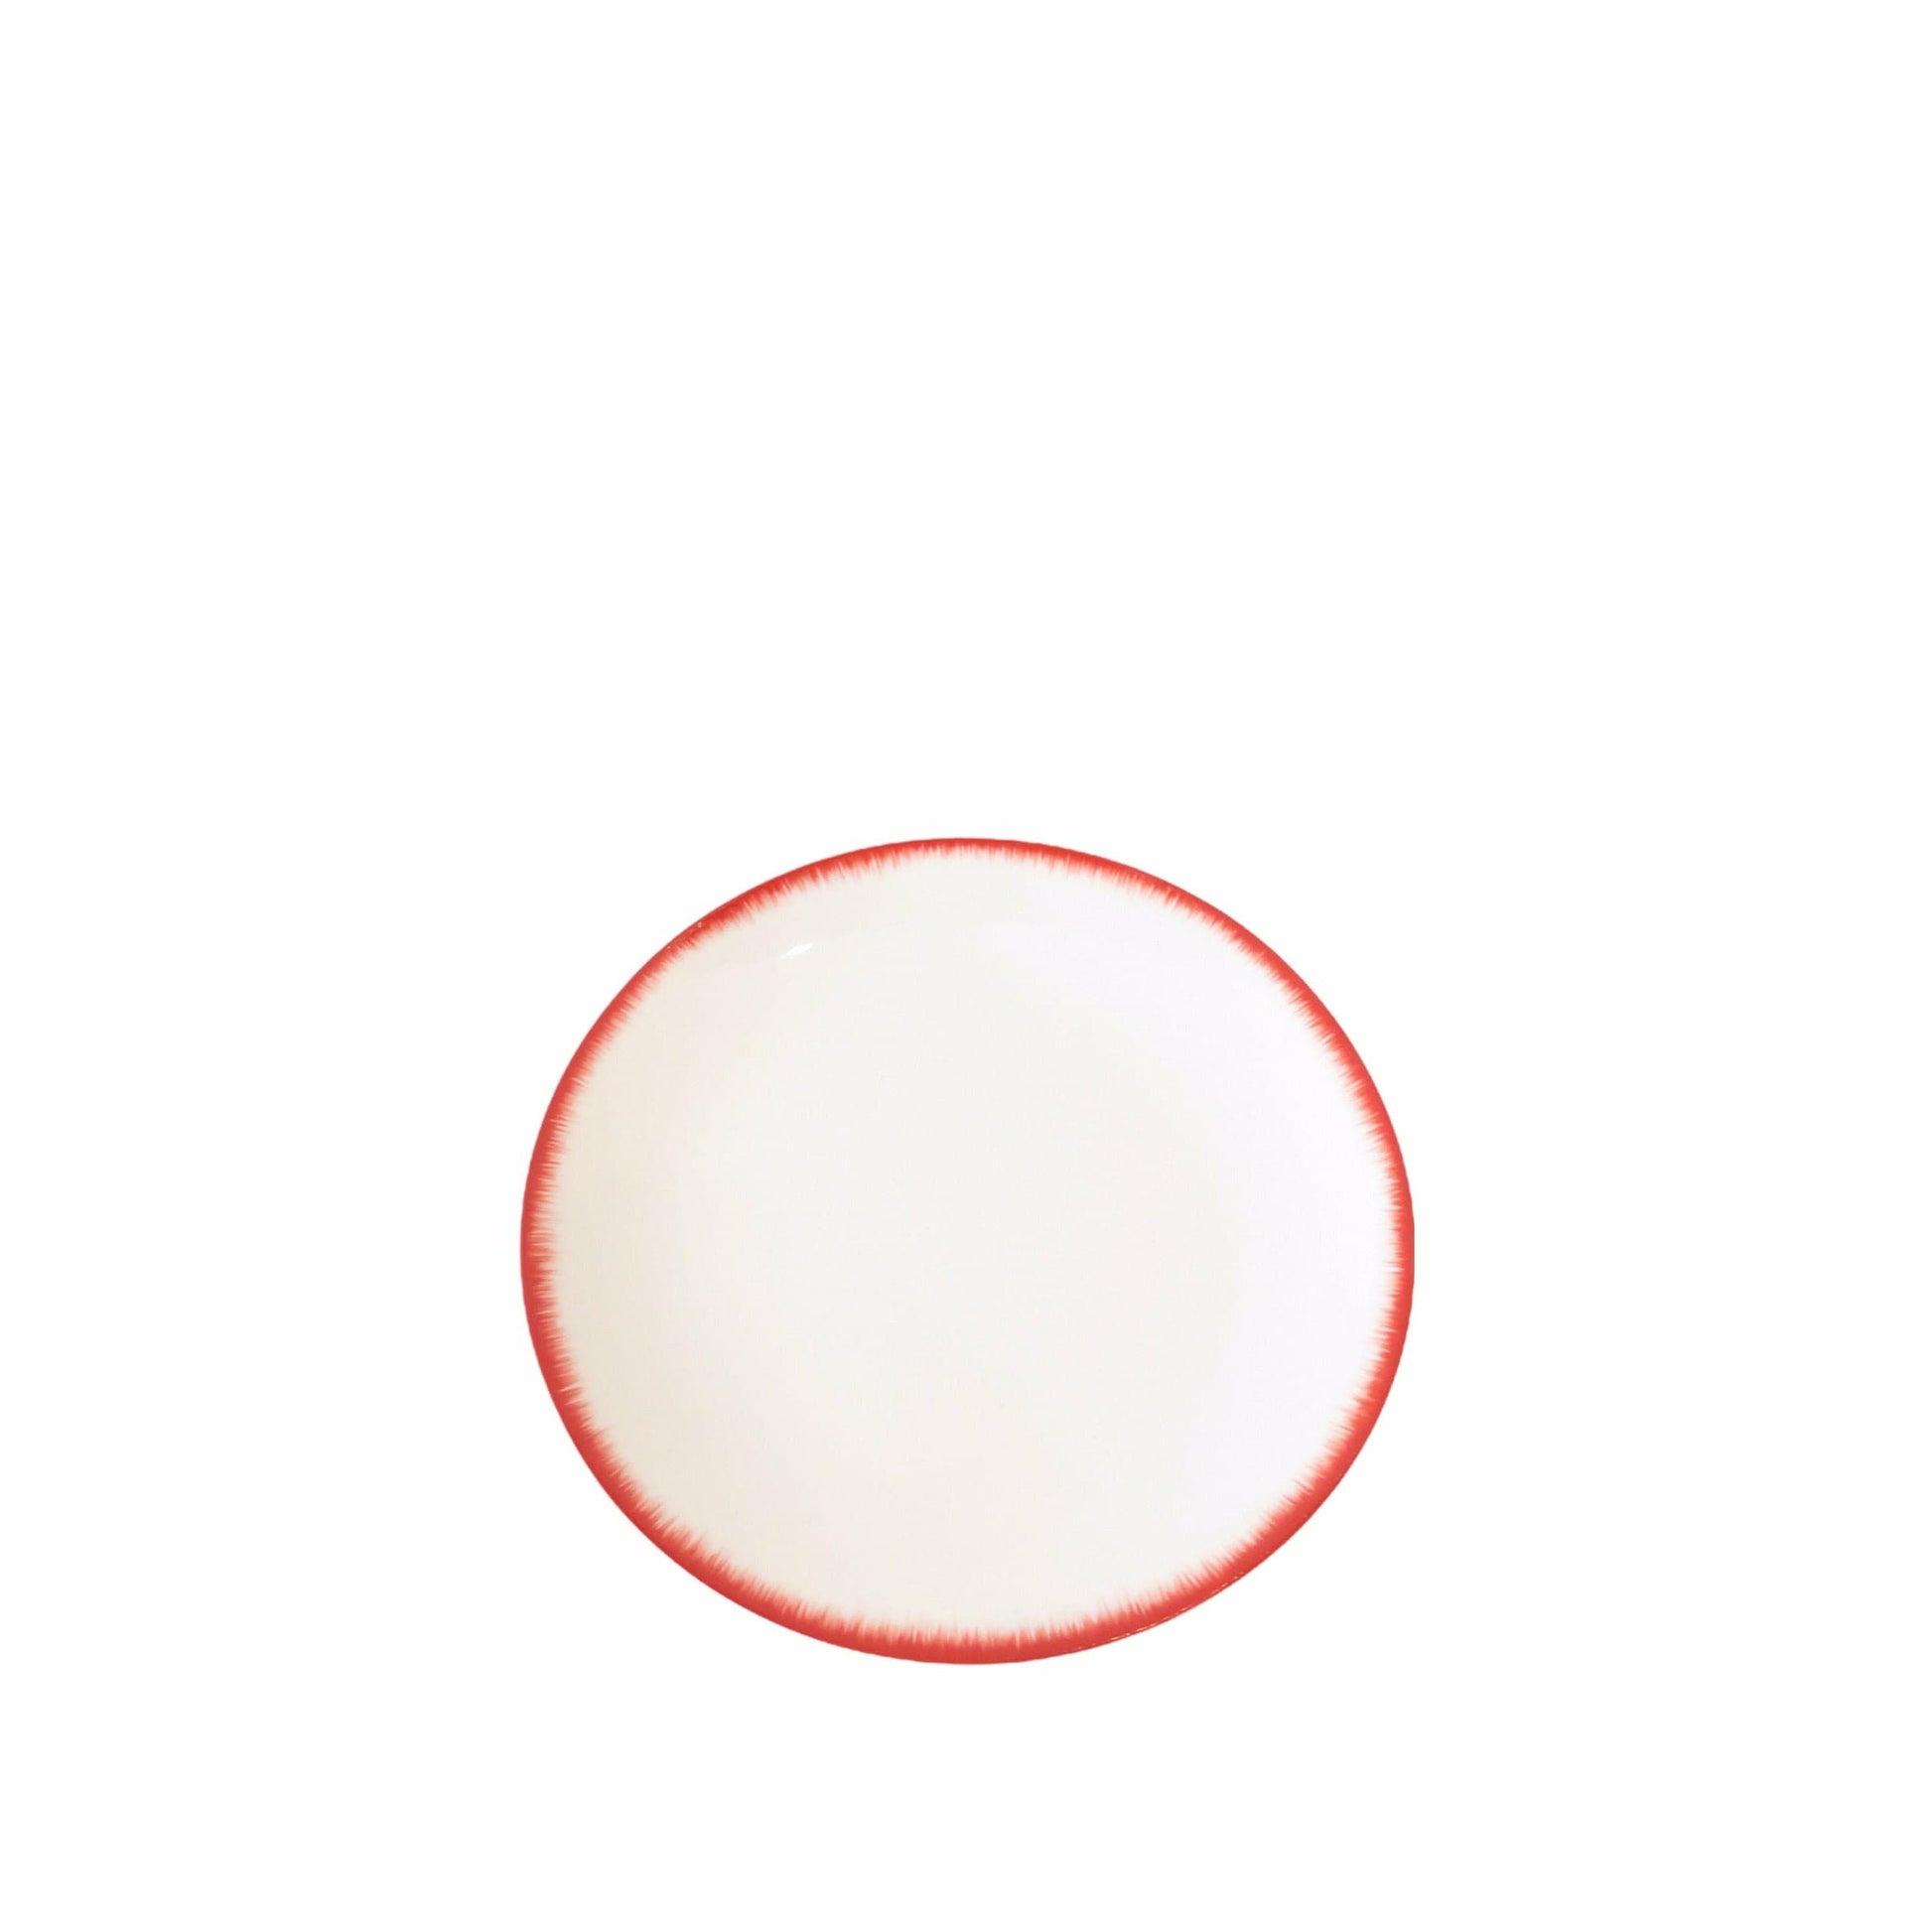 Ann Demeulemeester Home Plate 28 centimeters / Off-white & red / Porcelain Ann Demeulemeester for Serax 28 cm plates (set of two)